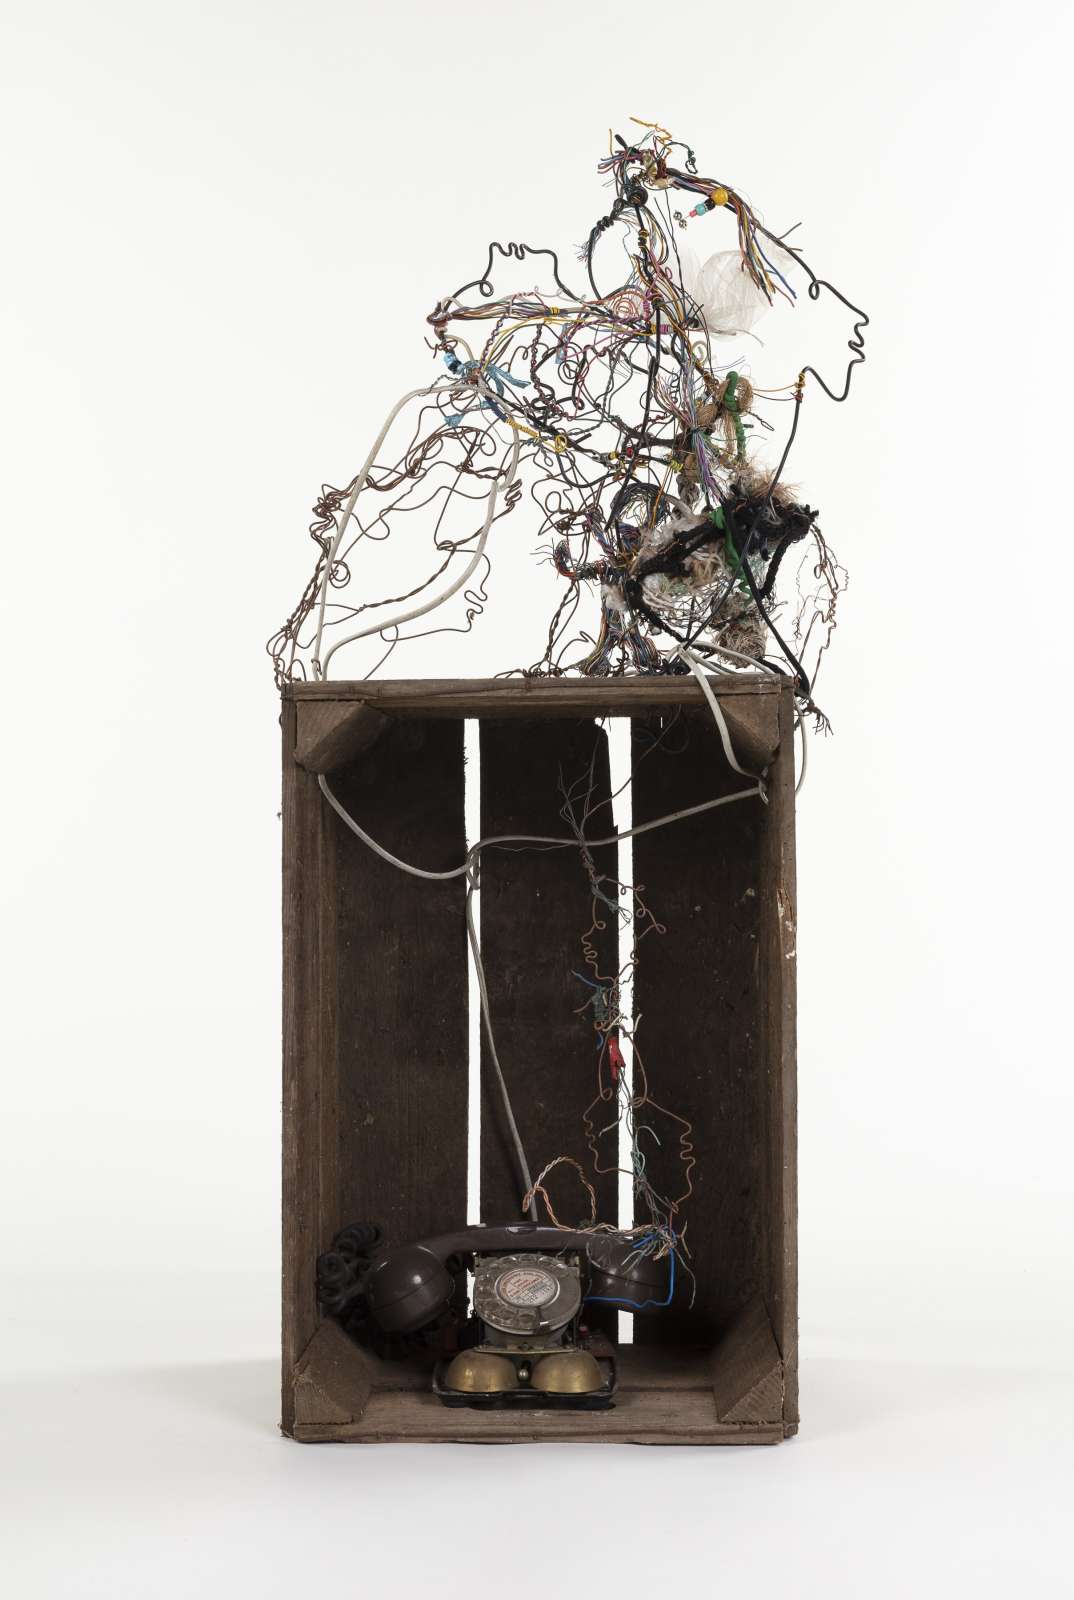 Lonnie Holley, The Growth of Communication, 2022, wooden milk crate, telephone, cotton thread, telephone cables and wire, 98 x 44 x 30 cm